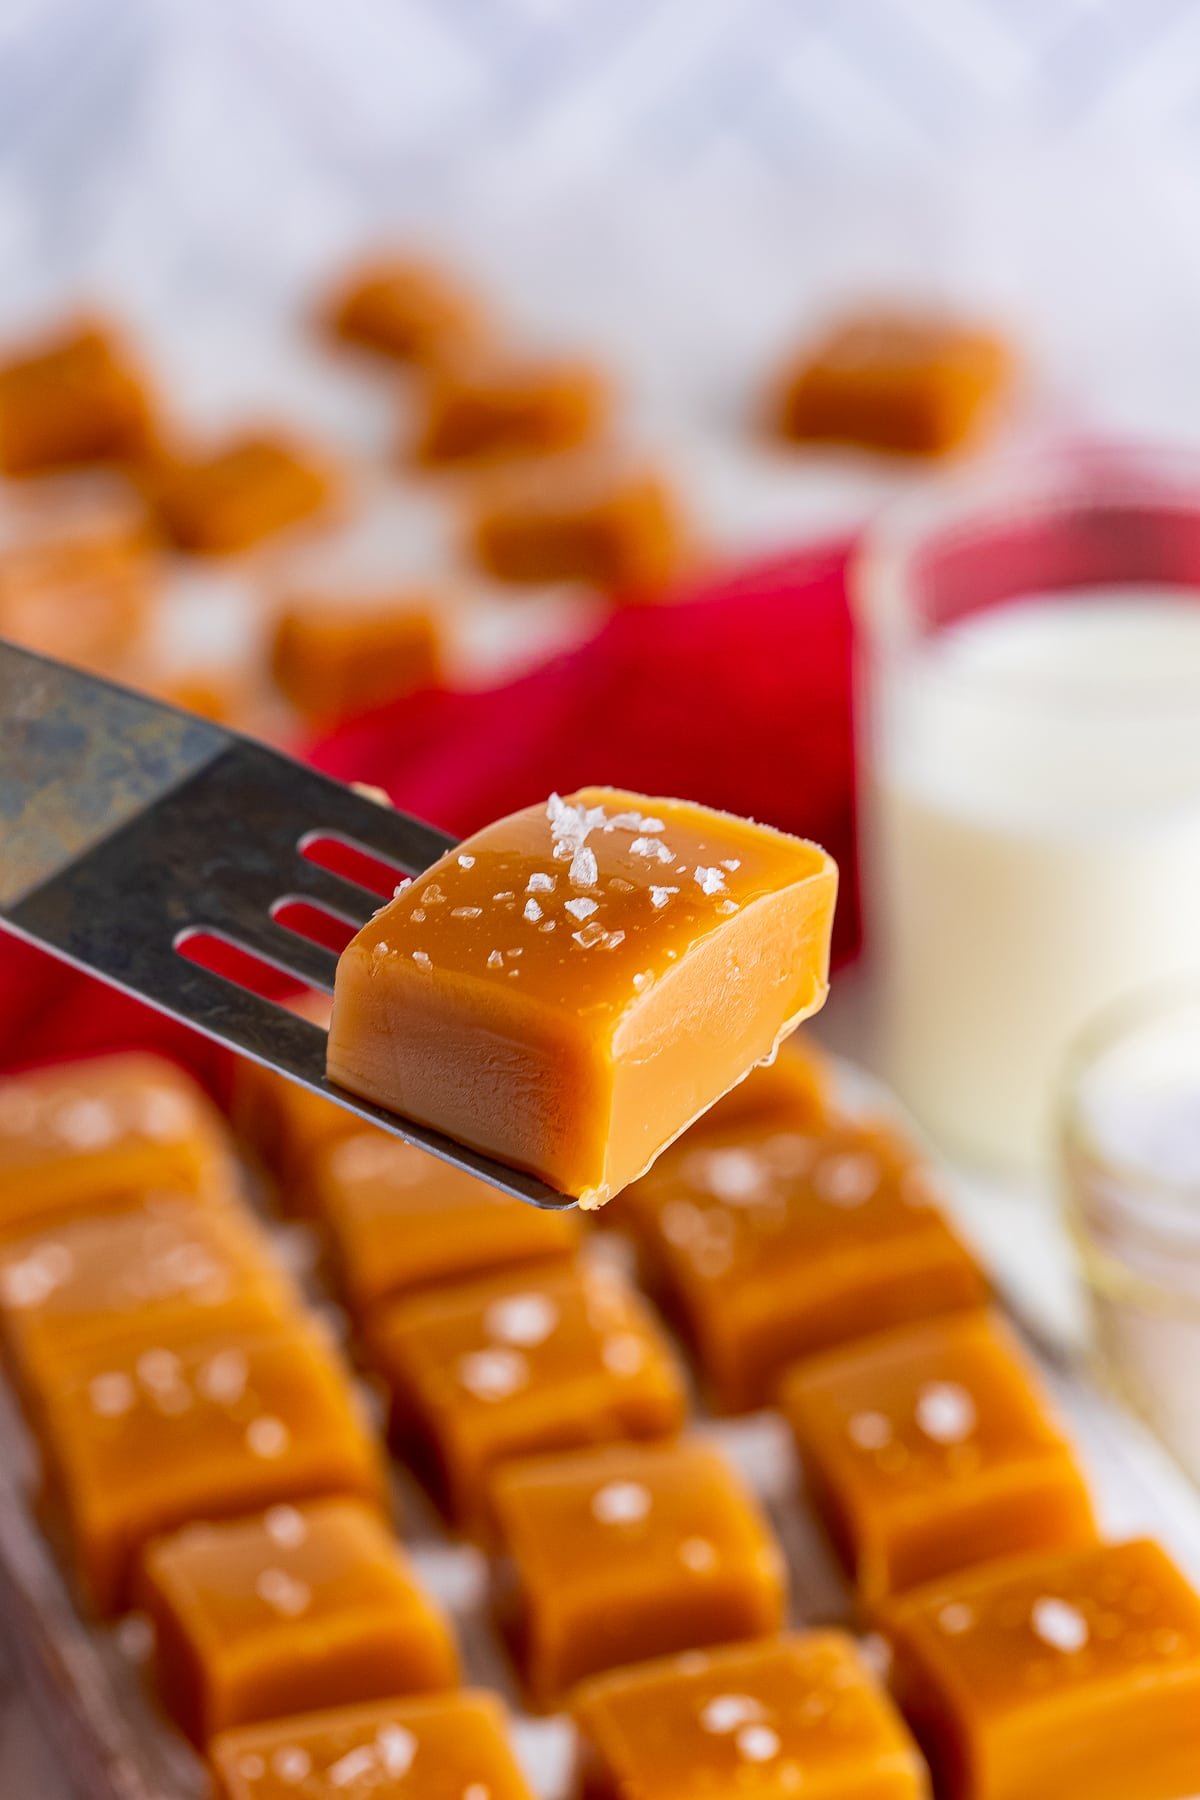 A Salted Caramel Recipe piece on a spatula hovering in air with more pieces in the background, glass of milk, and red linen